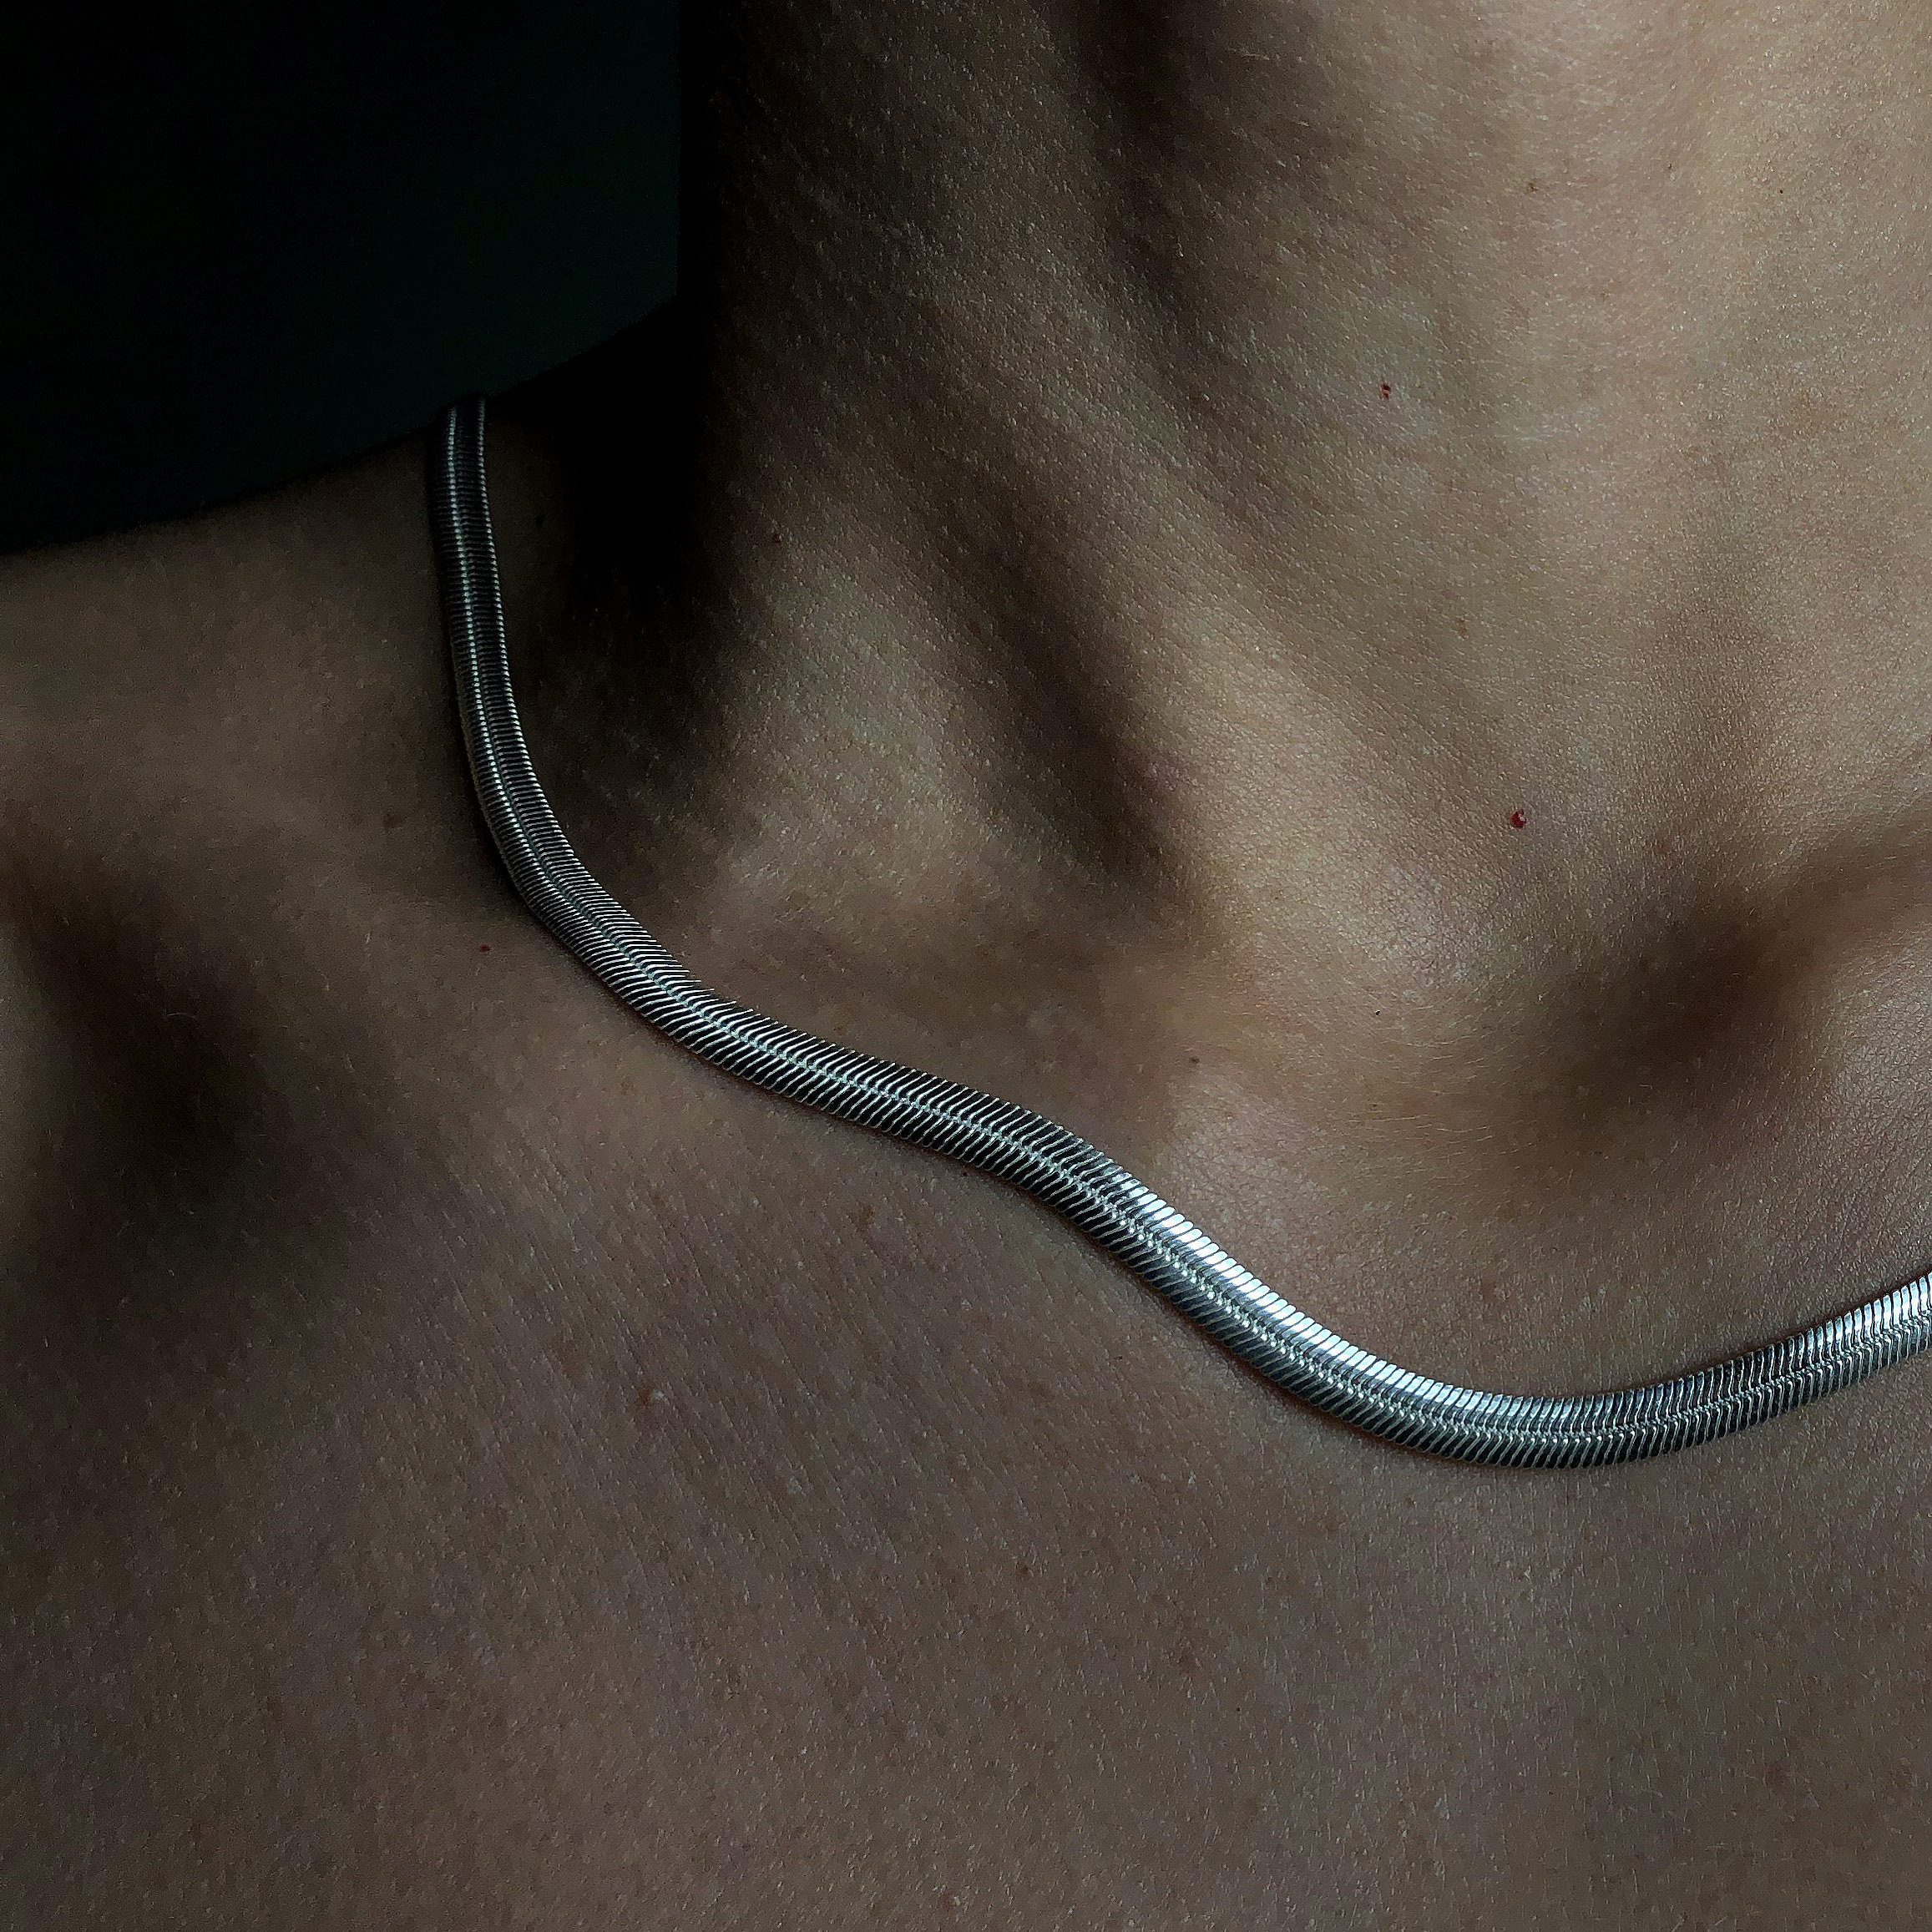 A shirtless man wearing a Herringbone Silver necklace